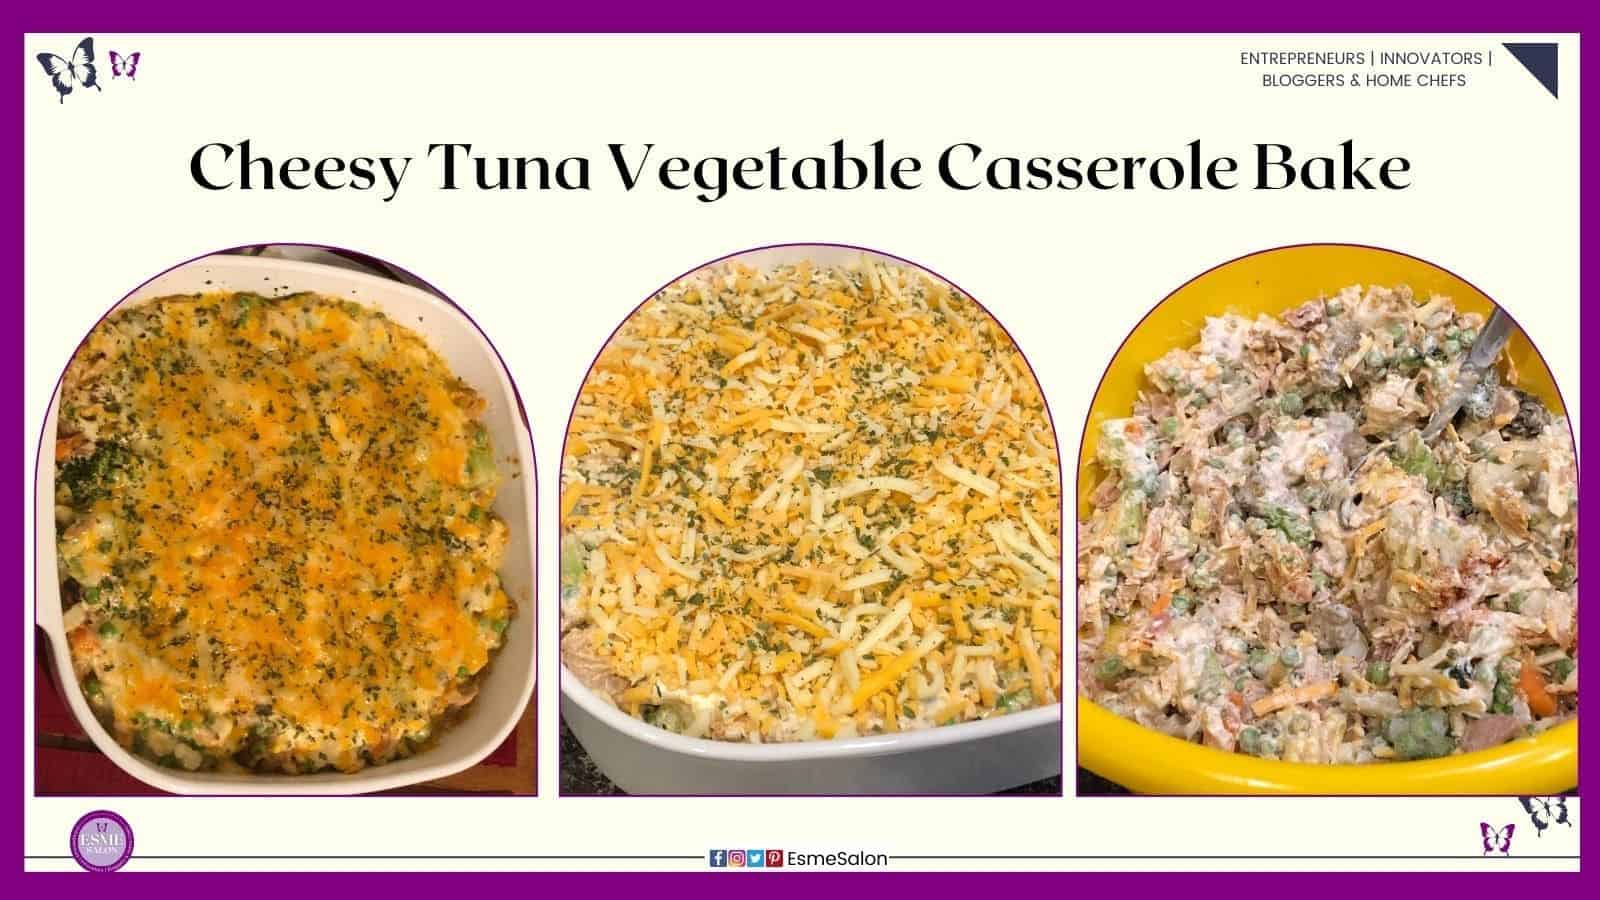 an image of a Cheesy Tuna Vegetable Casserole baked dish